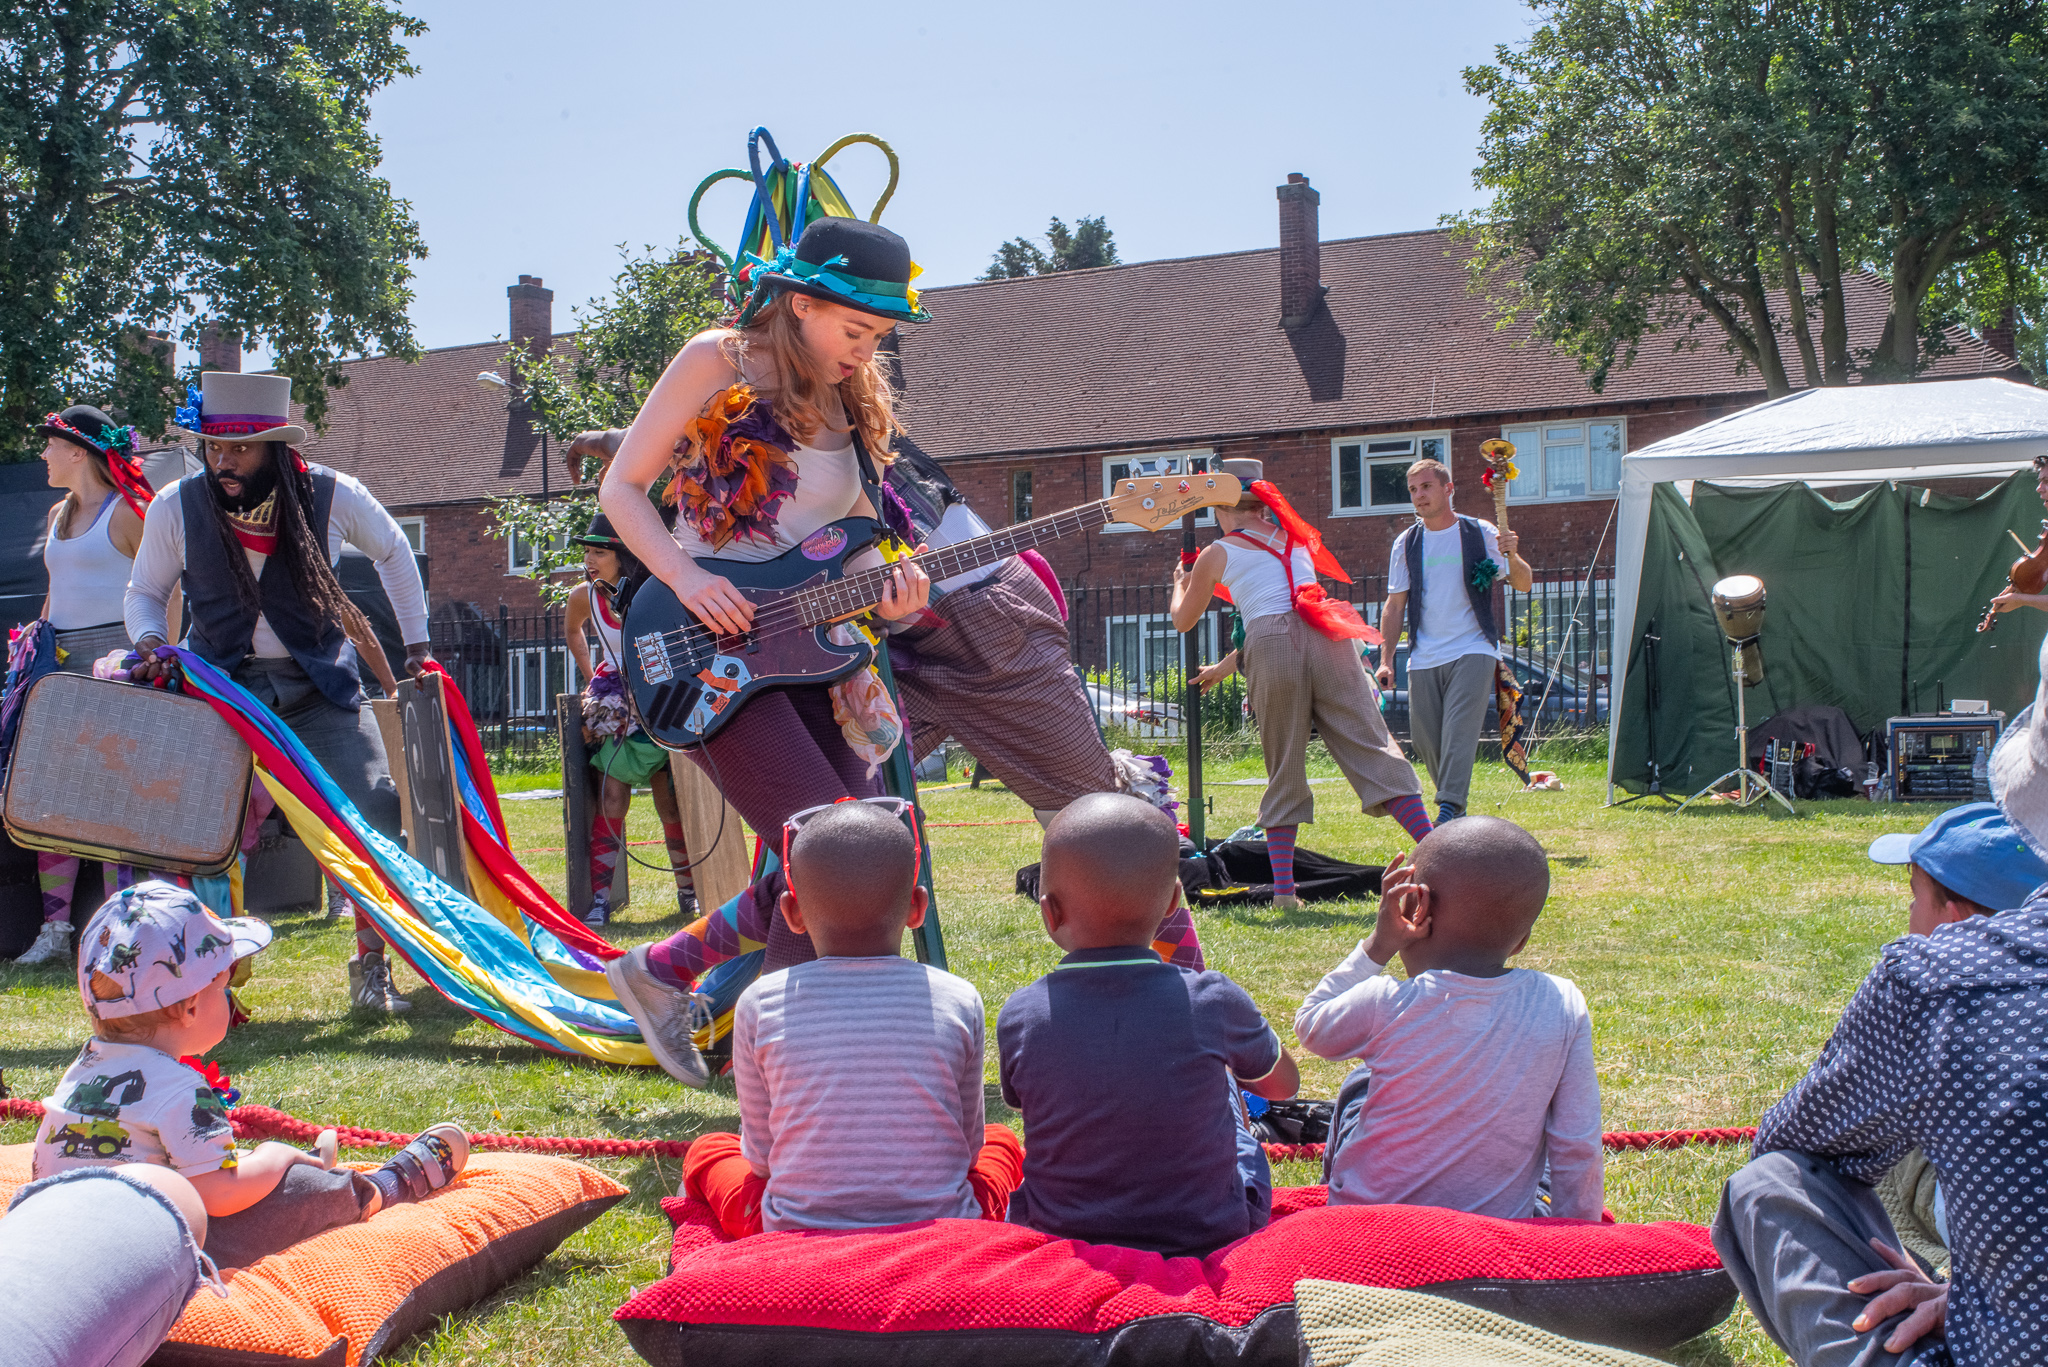 Folk Dance Remixed. A group is performing to some children in a park. The most prominent figure holds an electric guitar and is wearing a top hat. There are three children with their backs to us, sitting on a large red cushion